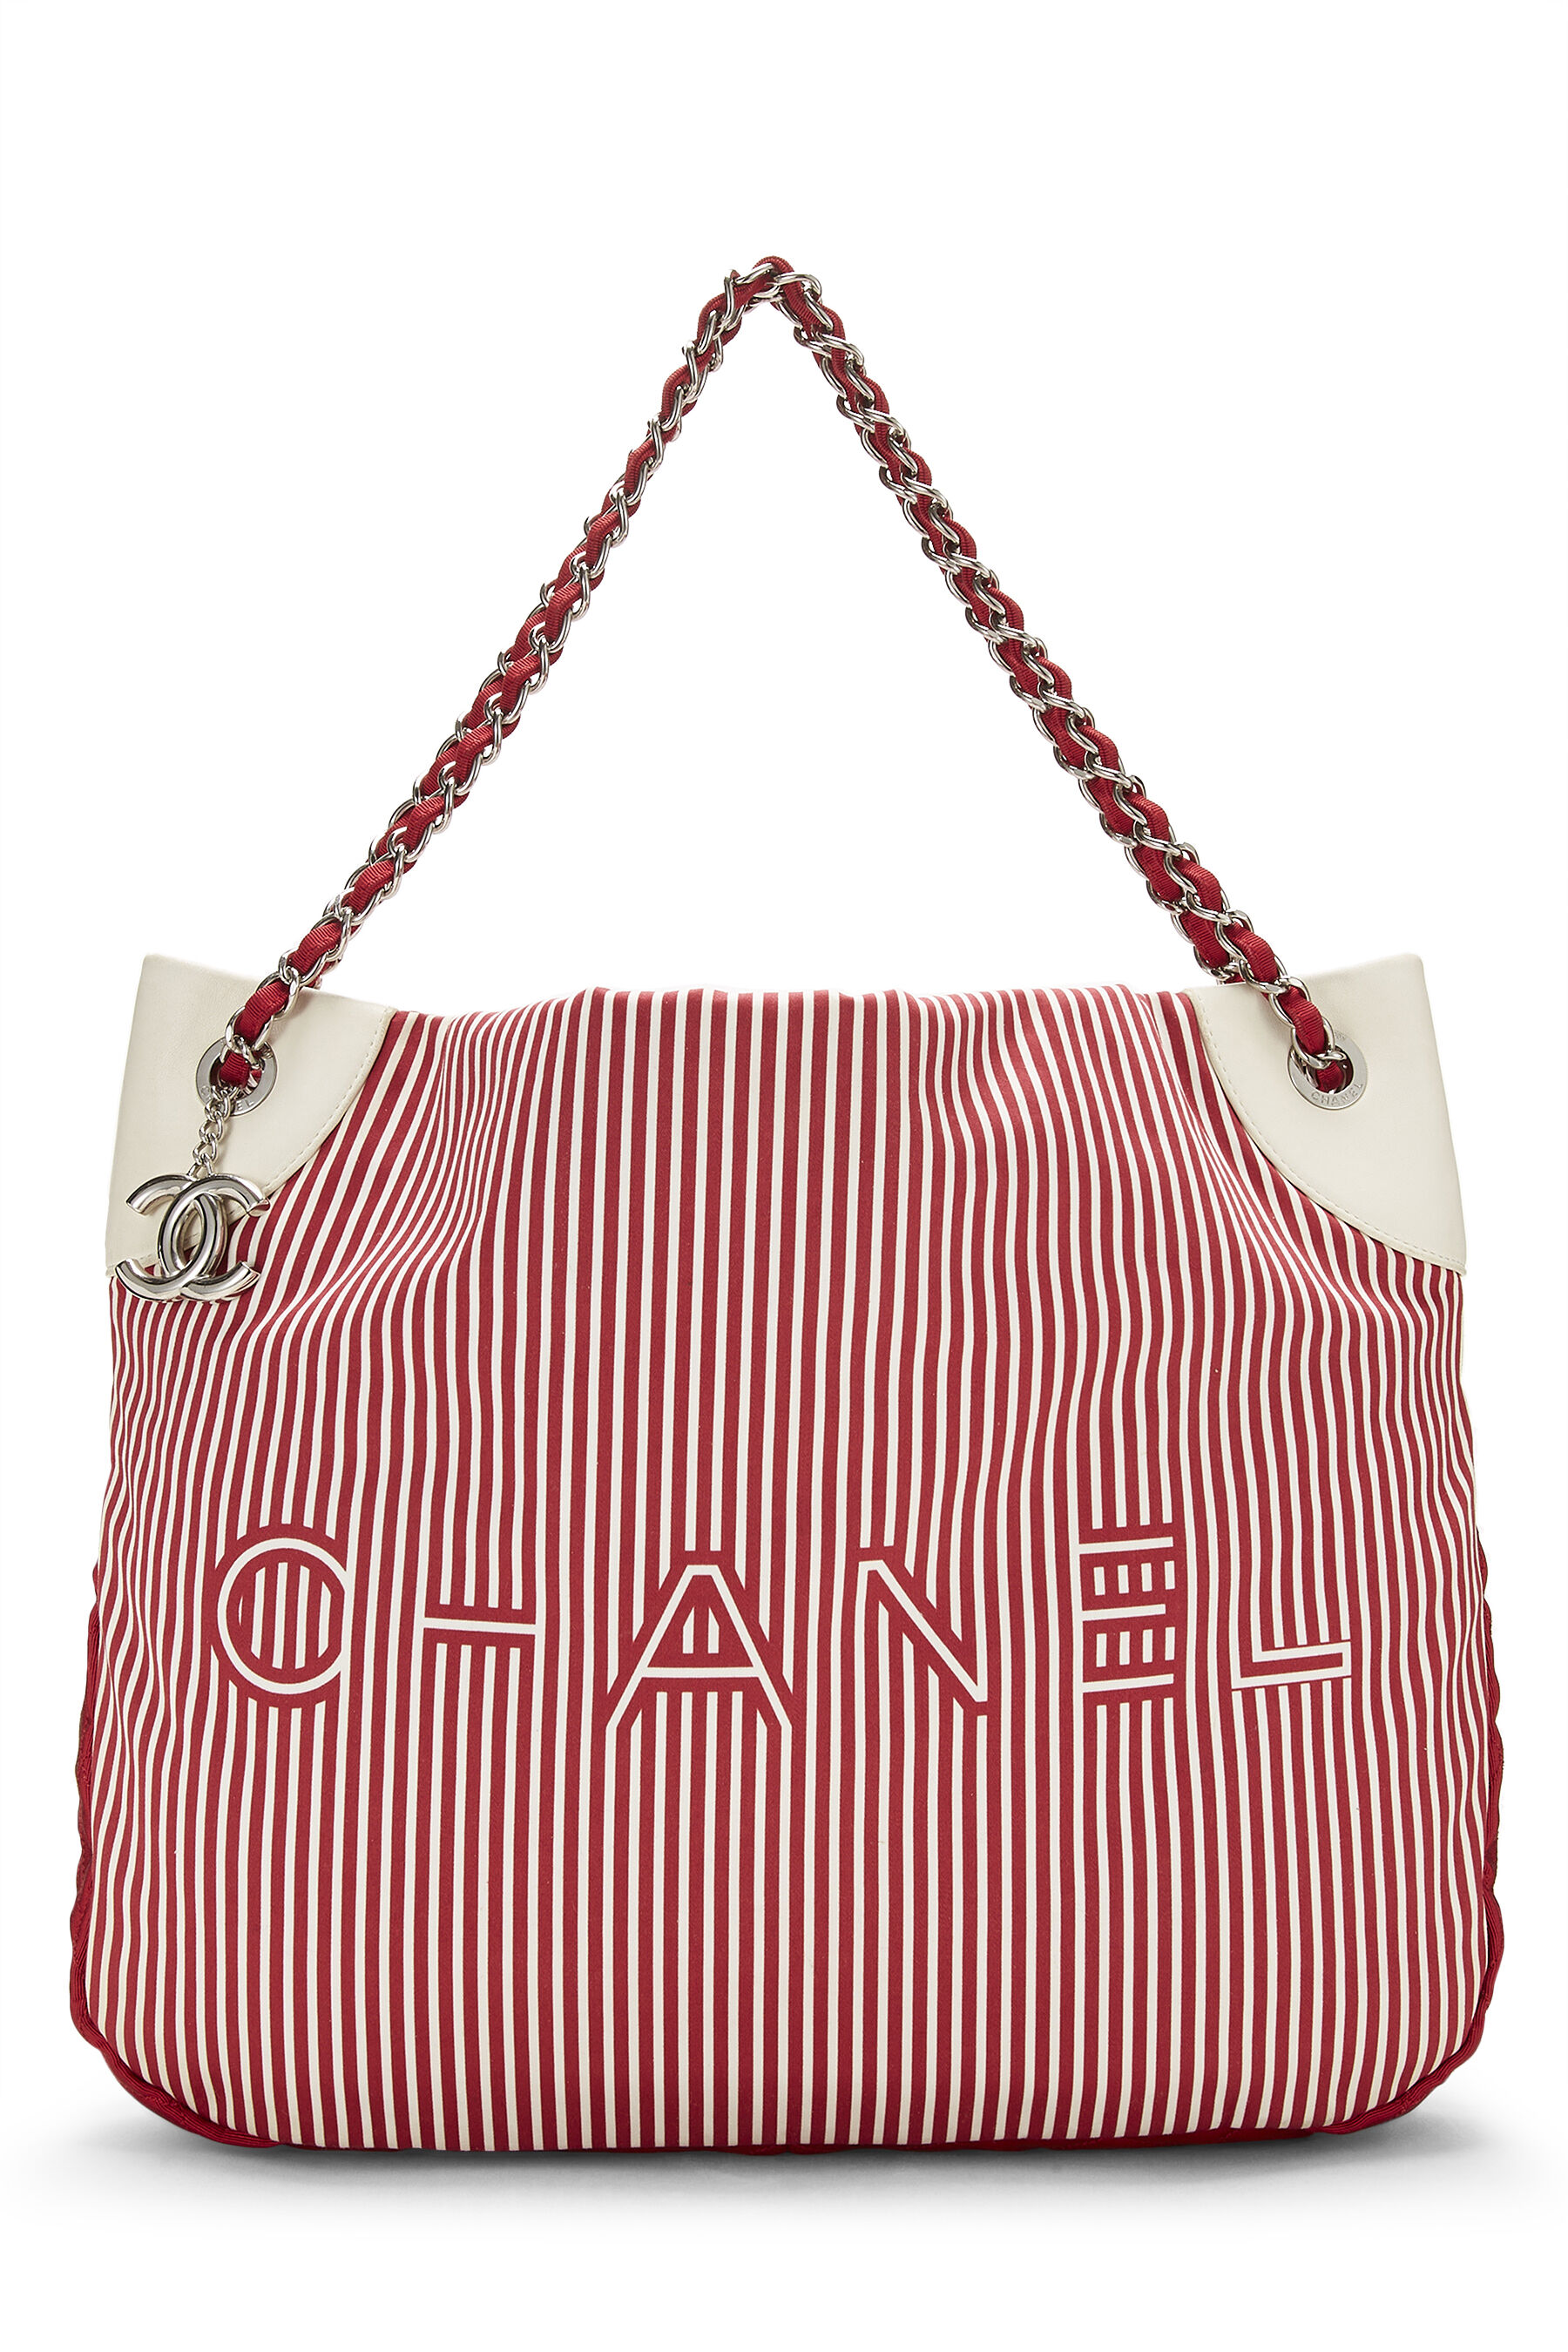 Chanel - Red & White Striped Fabric Tote Large